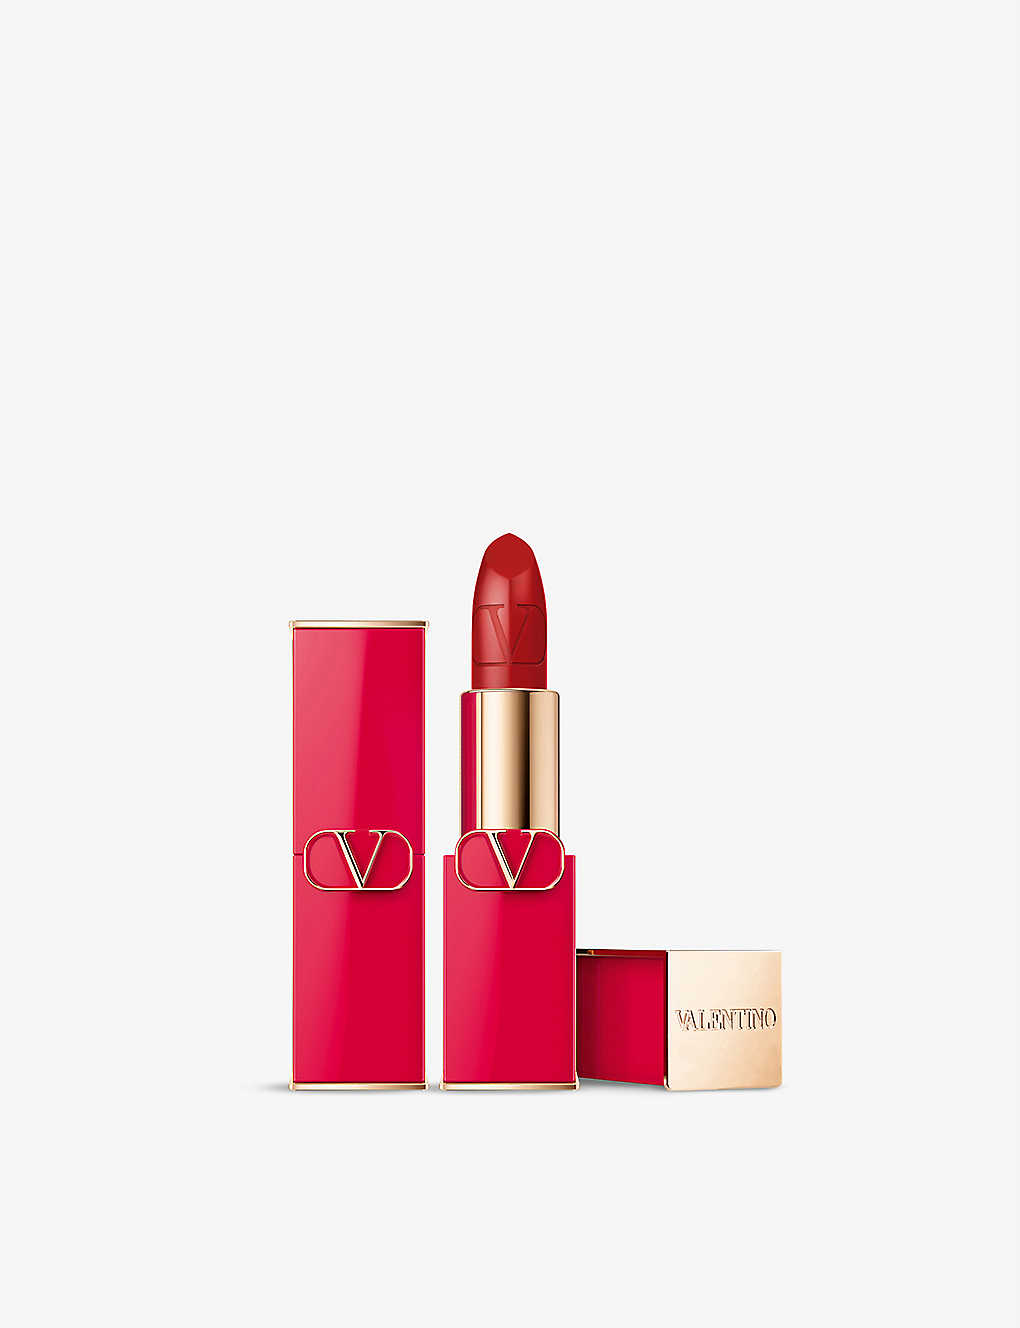 Valentino Beauty Rosso Valentino Satin Refillable Lipstick 3.4g In 217a Ethereal Red